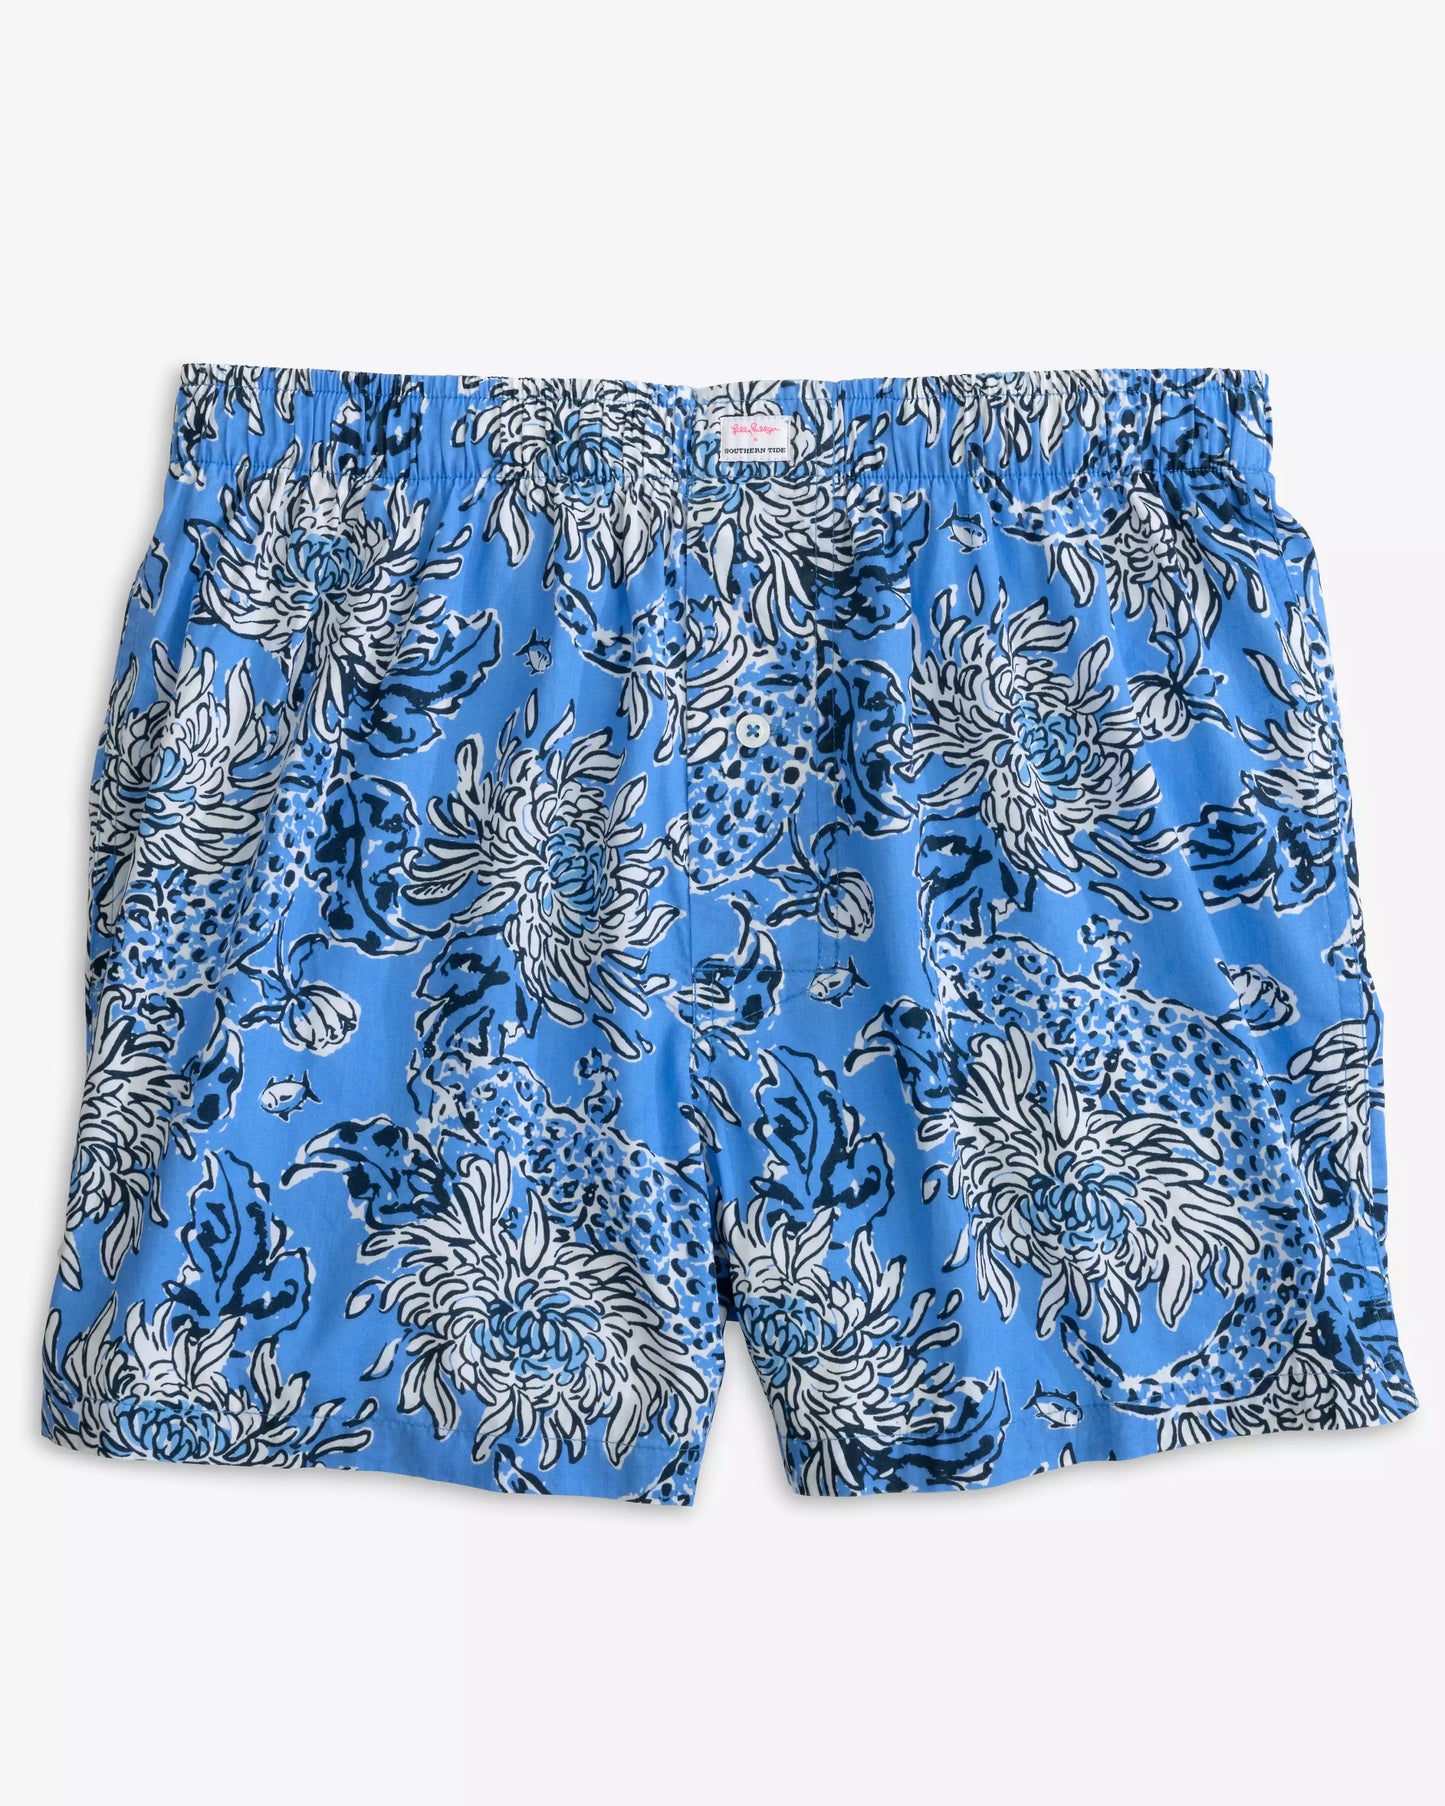 Lilly Pulitzer x Southern Tide Croc and Lock It Boxer, Boca Blue